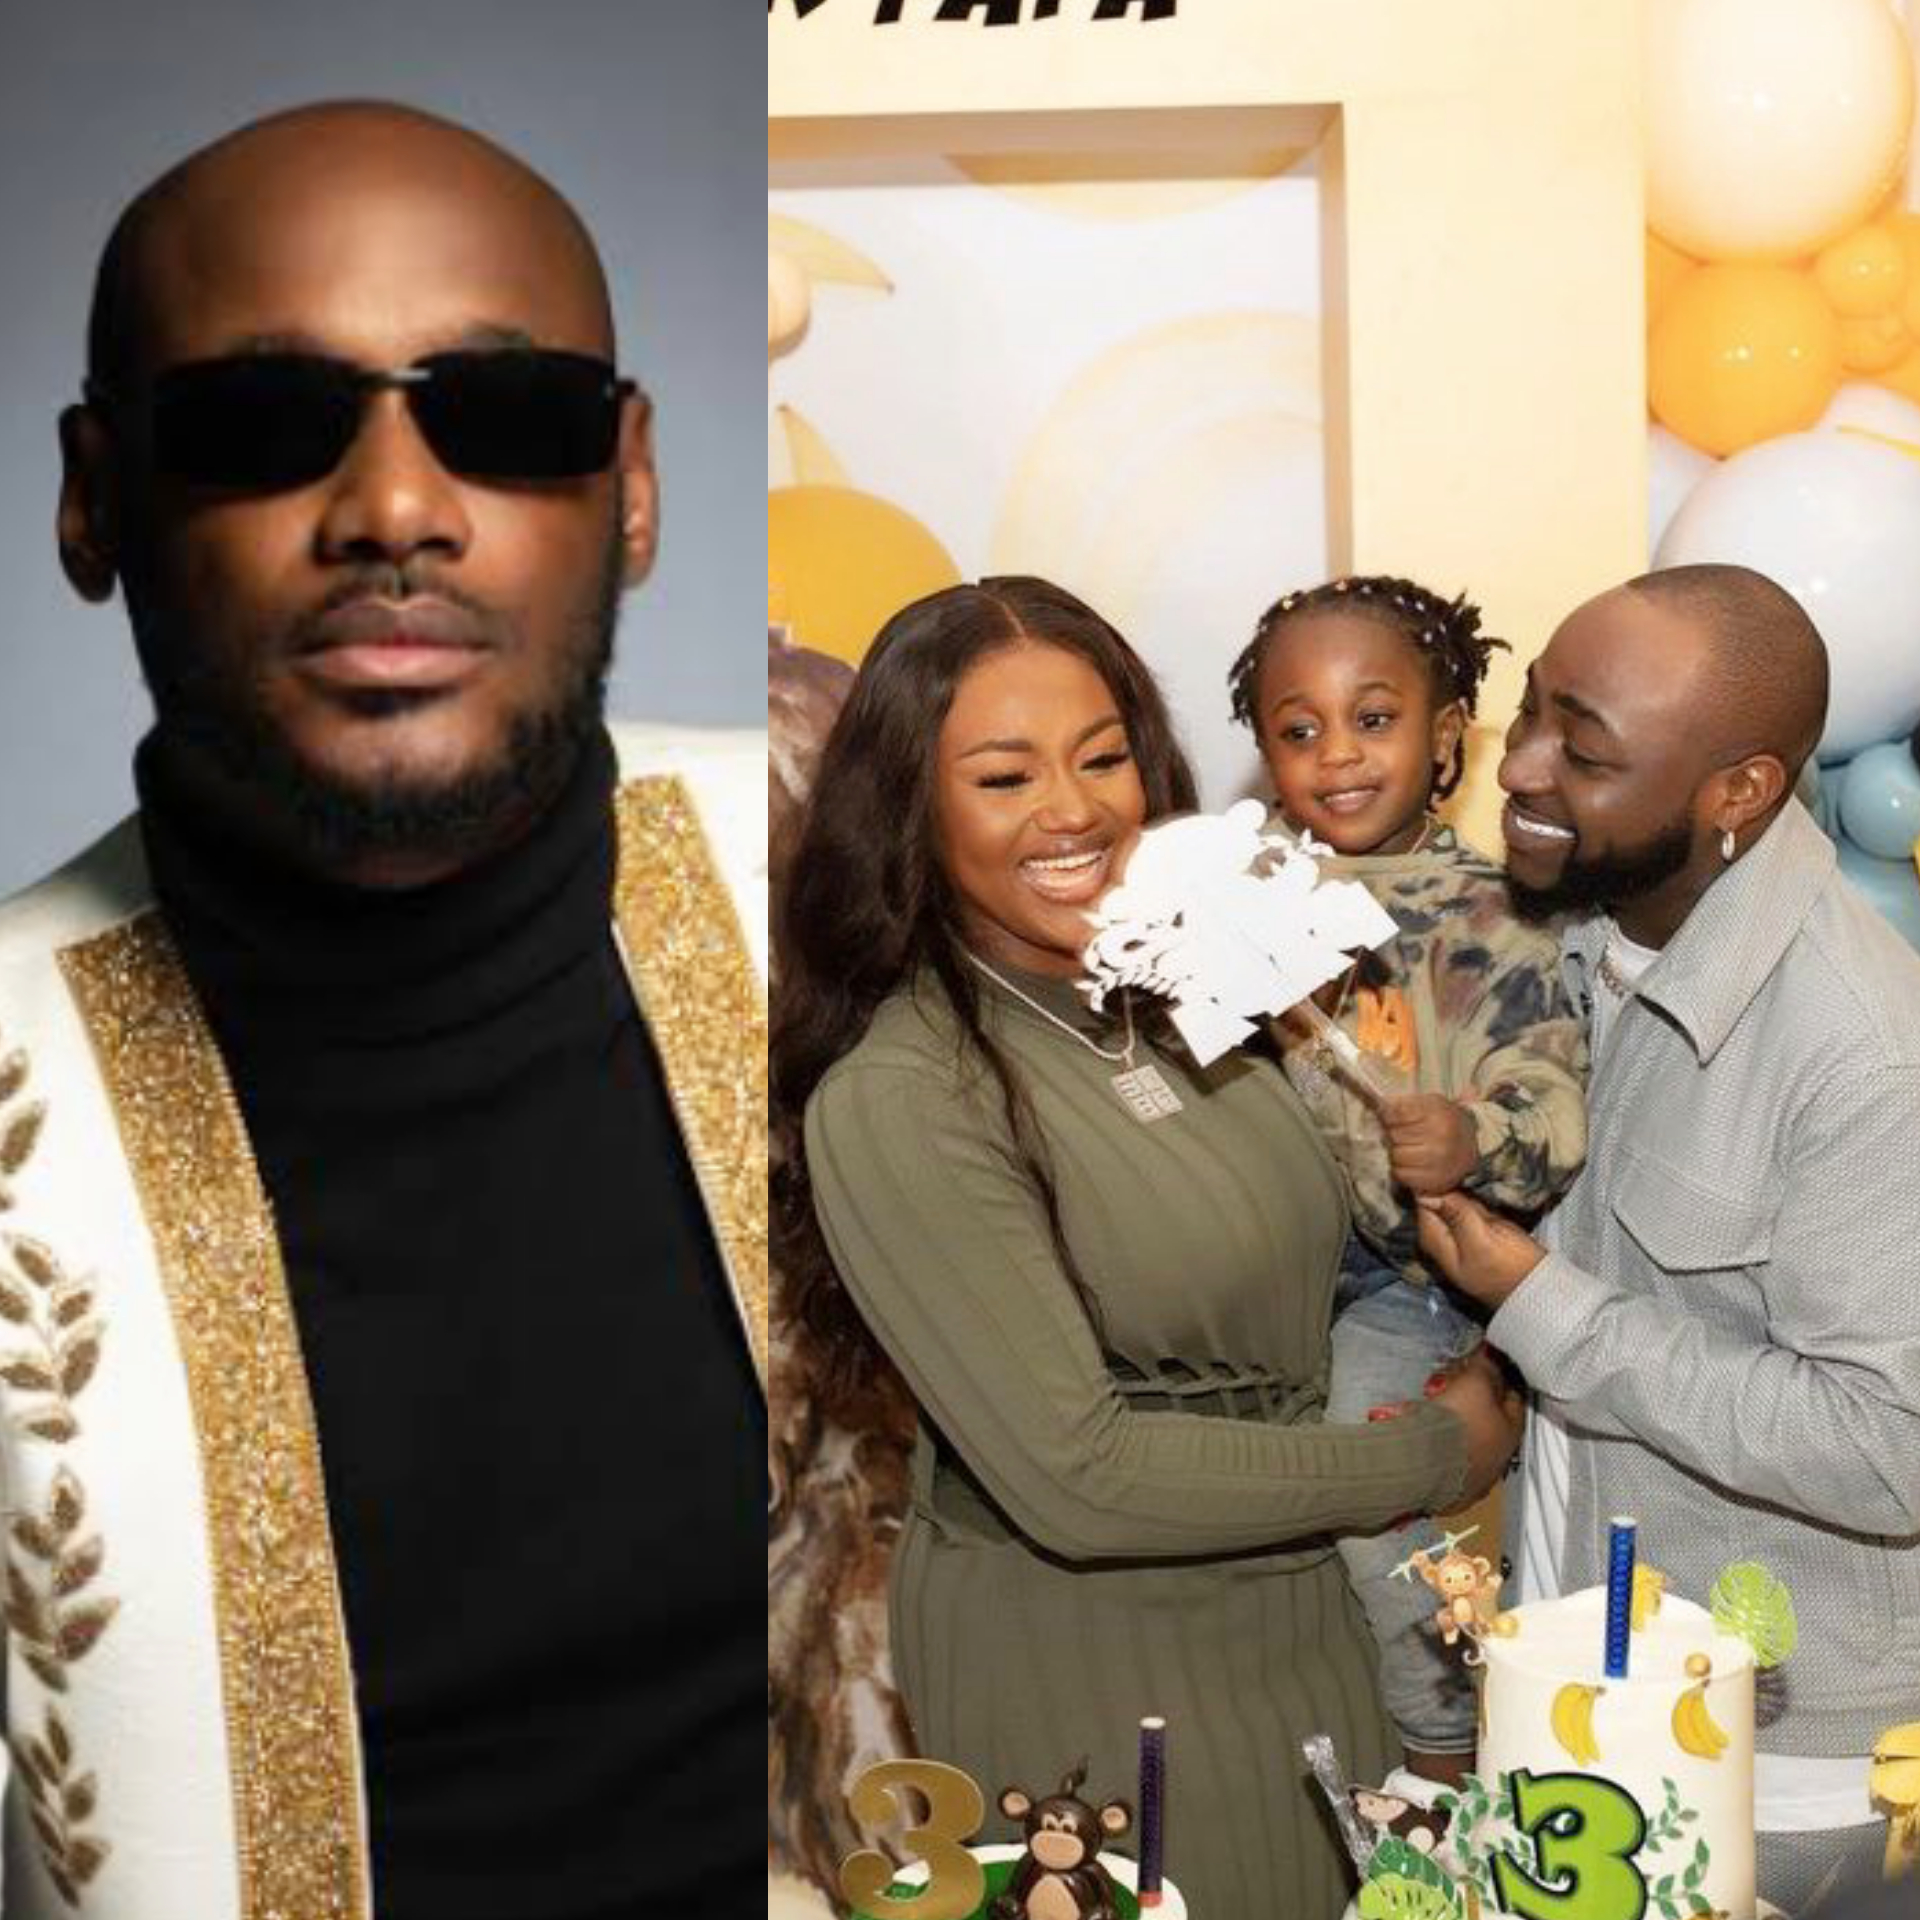 "No One Truly Understands What Davido And Chioma Are Going Through" 2Face Idibia